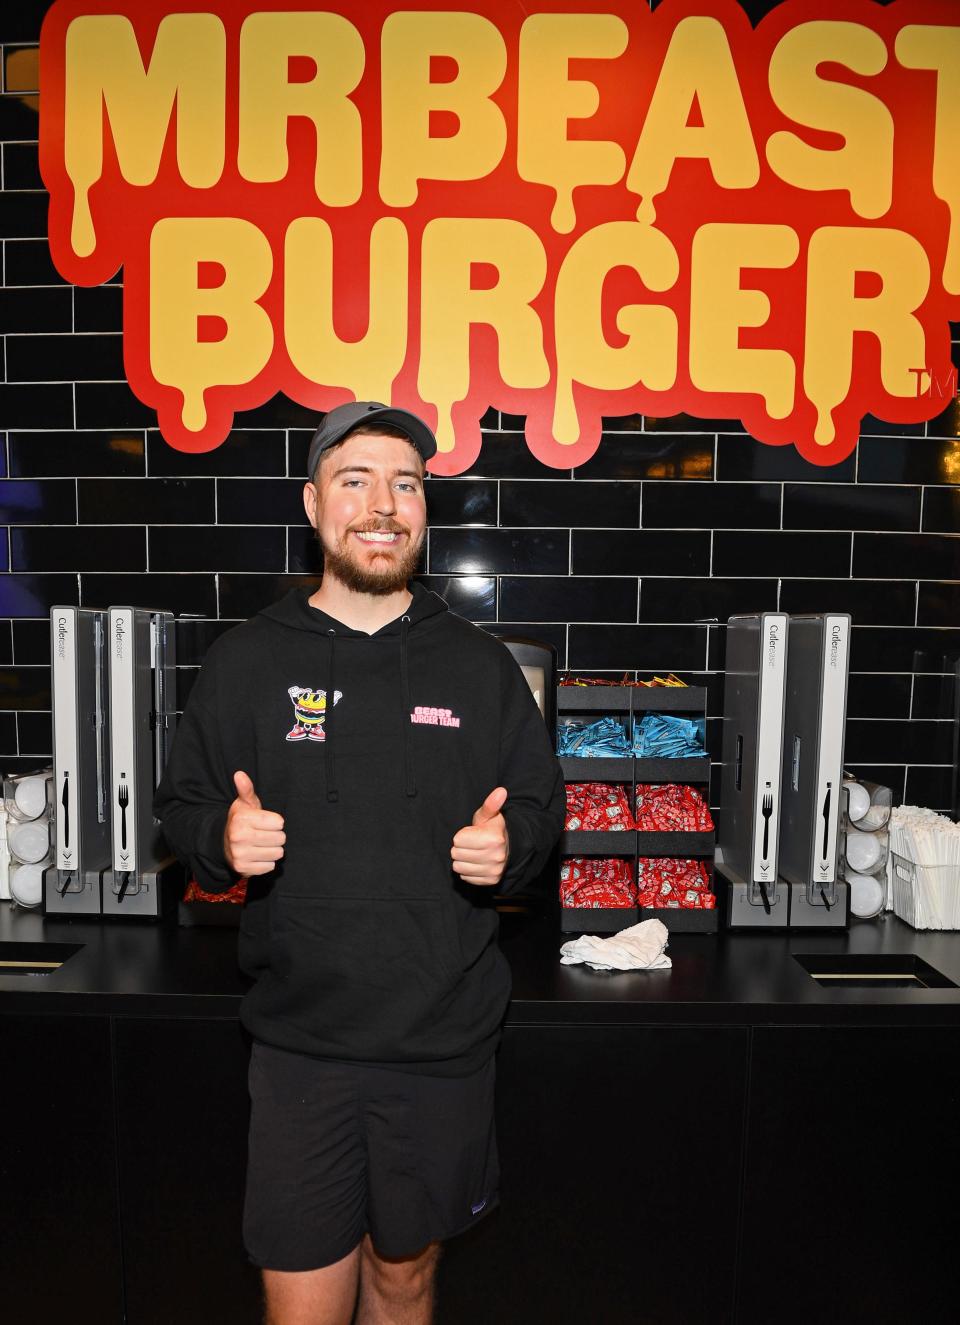 YouTube star MrBeast attends the launch of the first physical MrBeast Burger Restaurant at American Dream on Sept. 4, 2022 in East Rutherford, New Jersey.